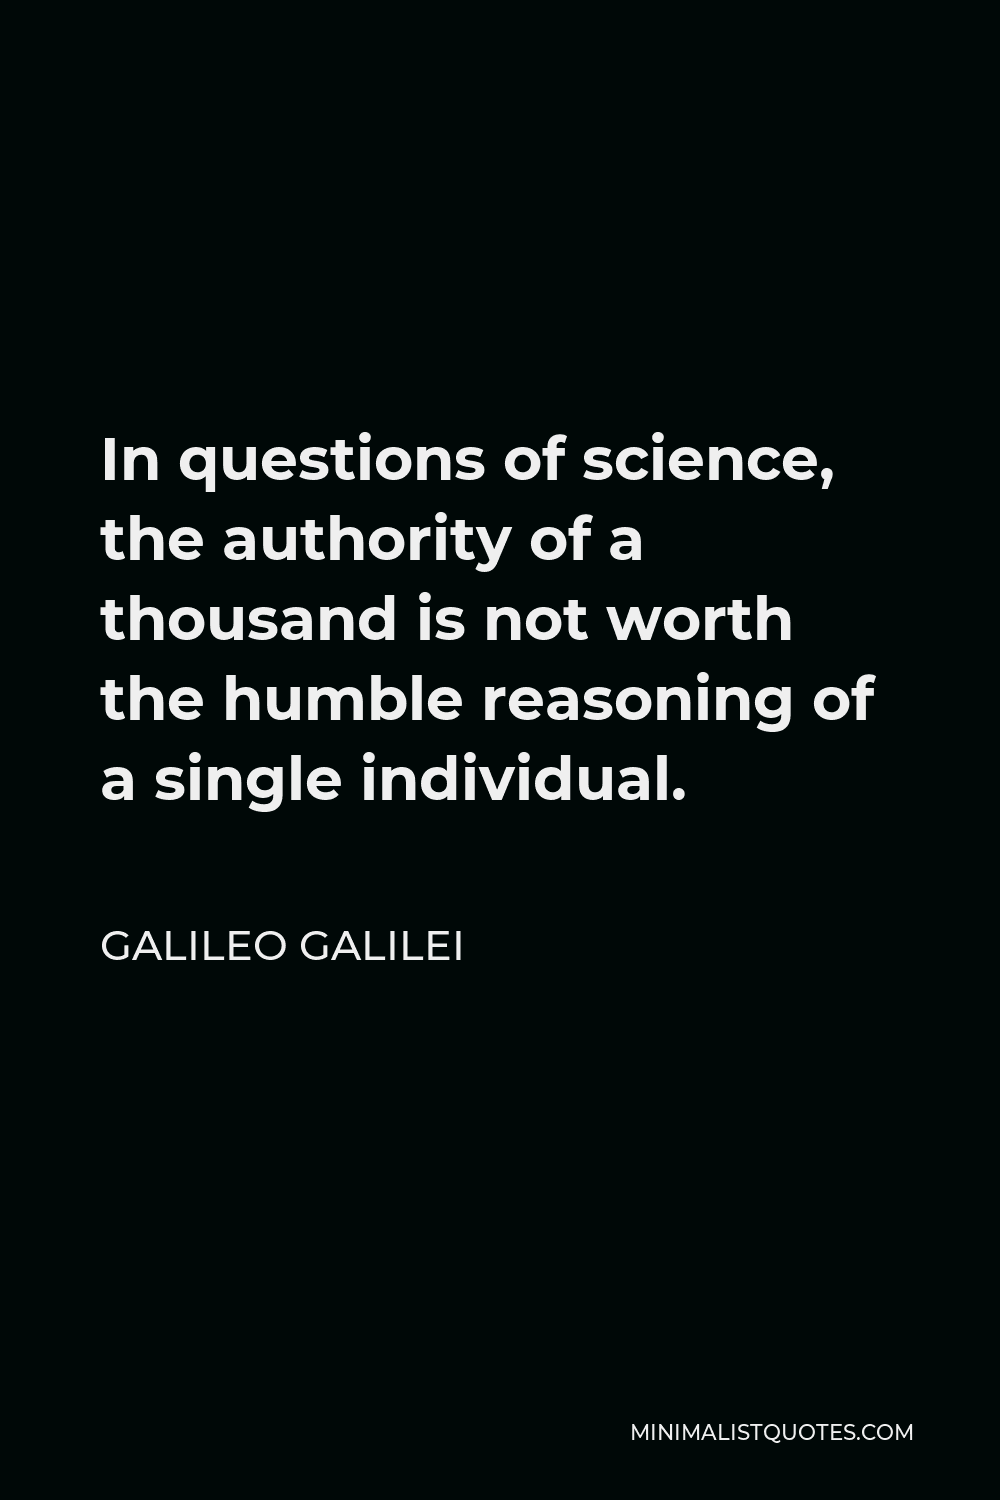 Galileo Galilei Quote - In questions of science, the authority of a thousand is not worth the humble reasoning of a single individual.